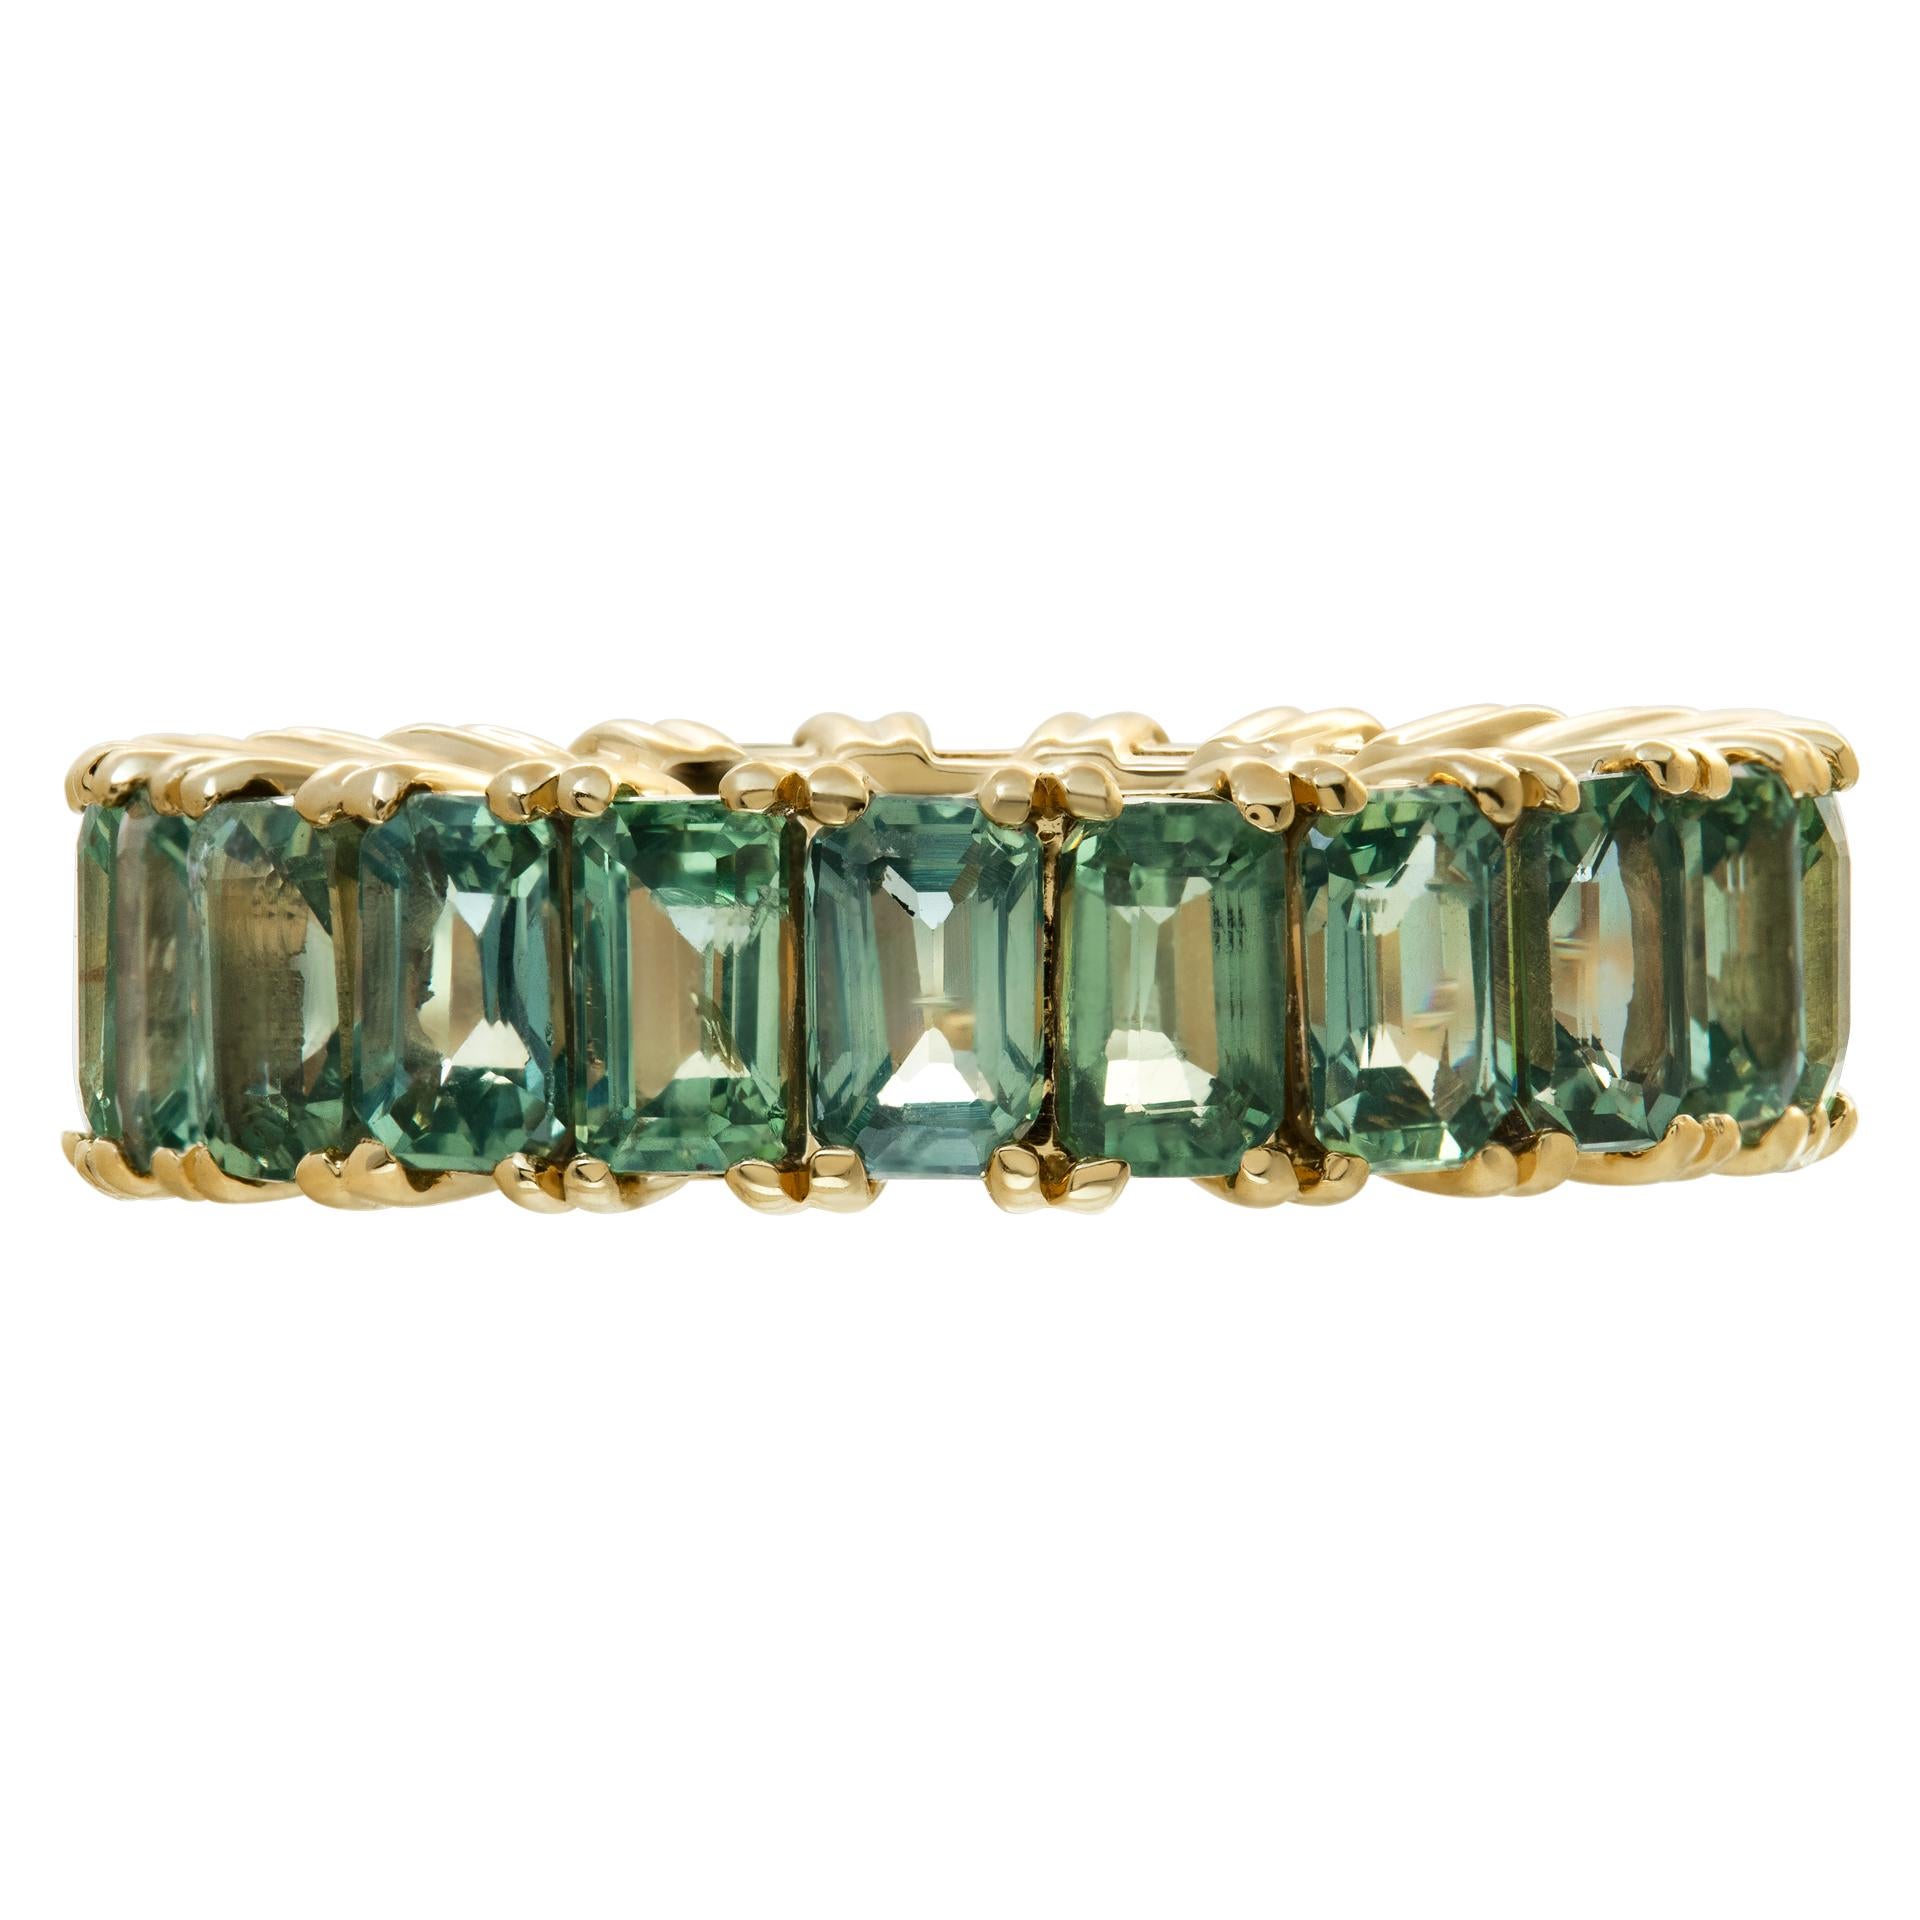 Green sapphire eternity band in 14k yellow gold with 8.12 carats in emerald cut green sapphires. Size 7, width 6mm.
